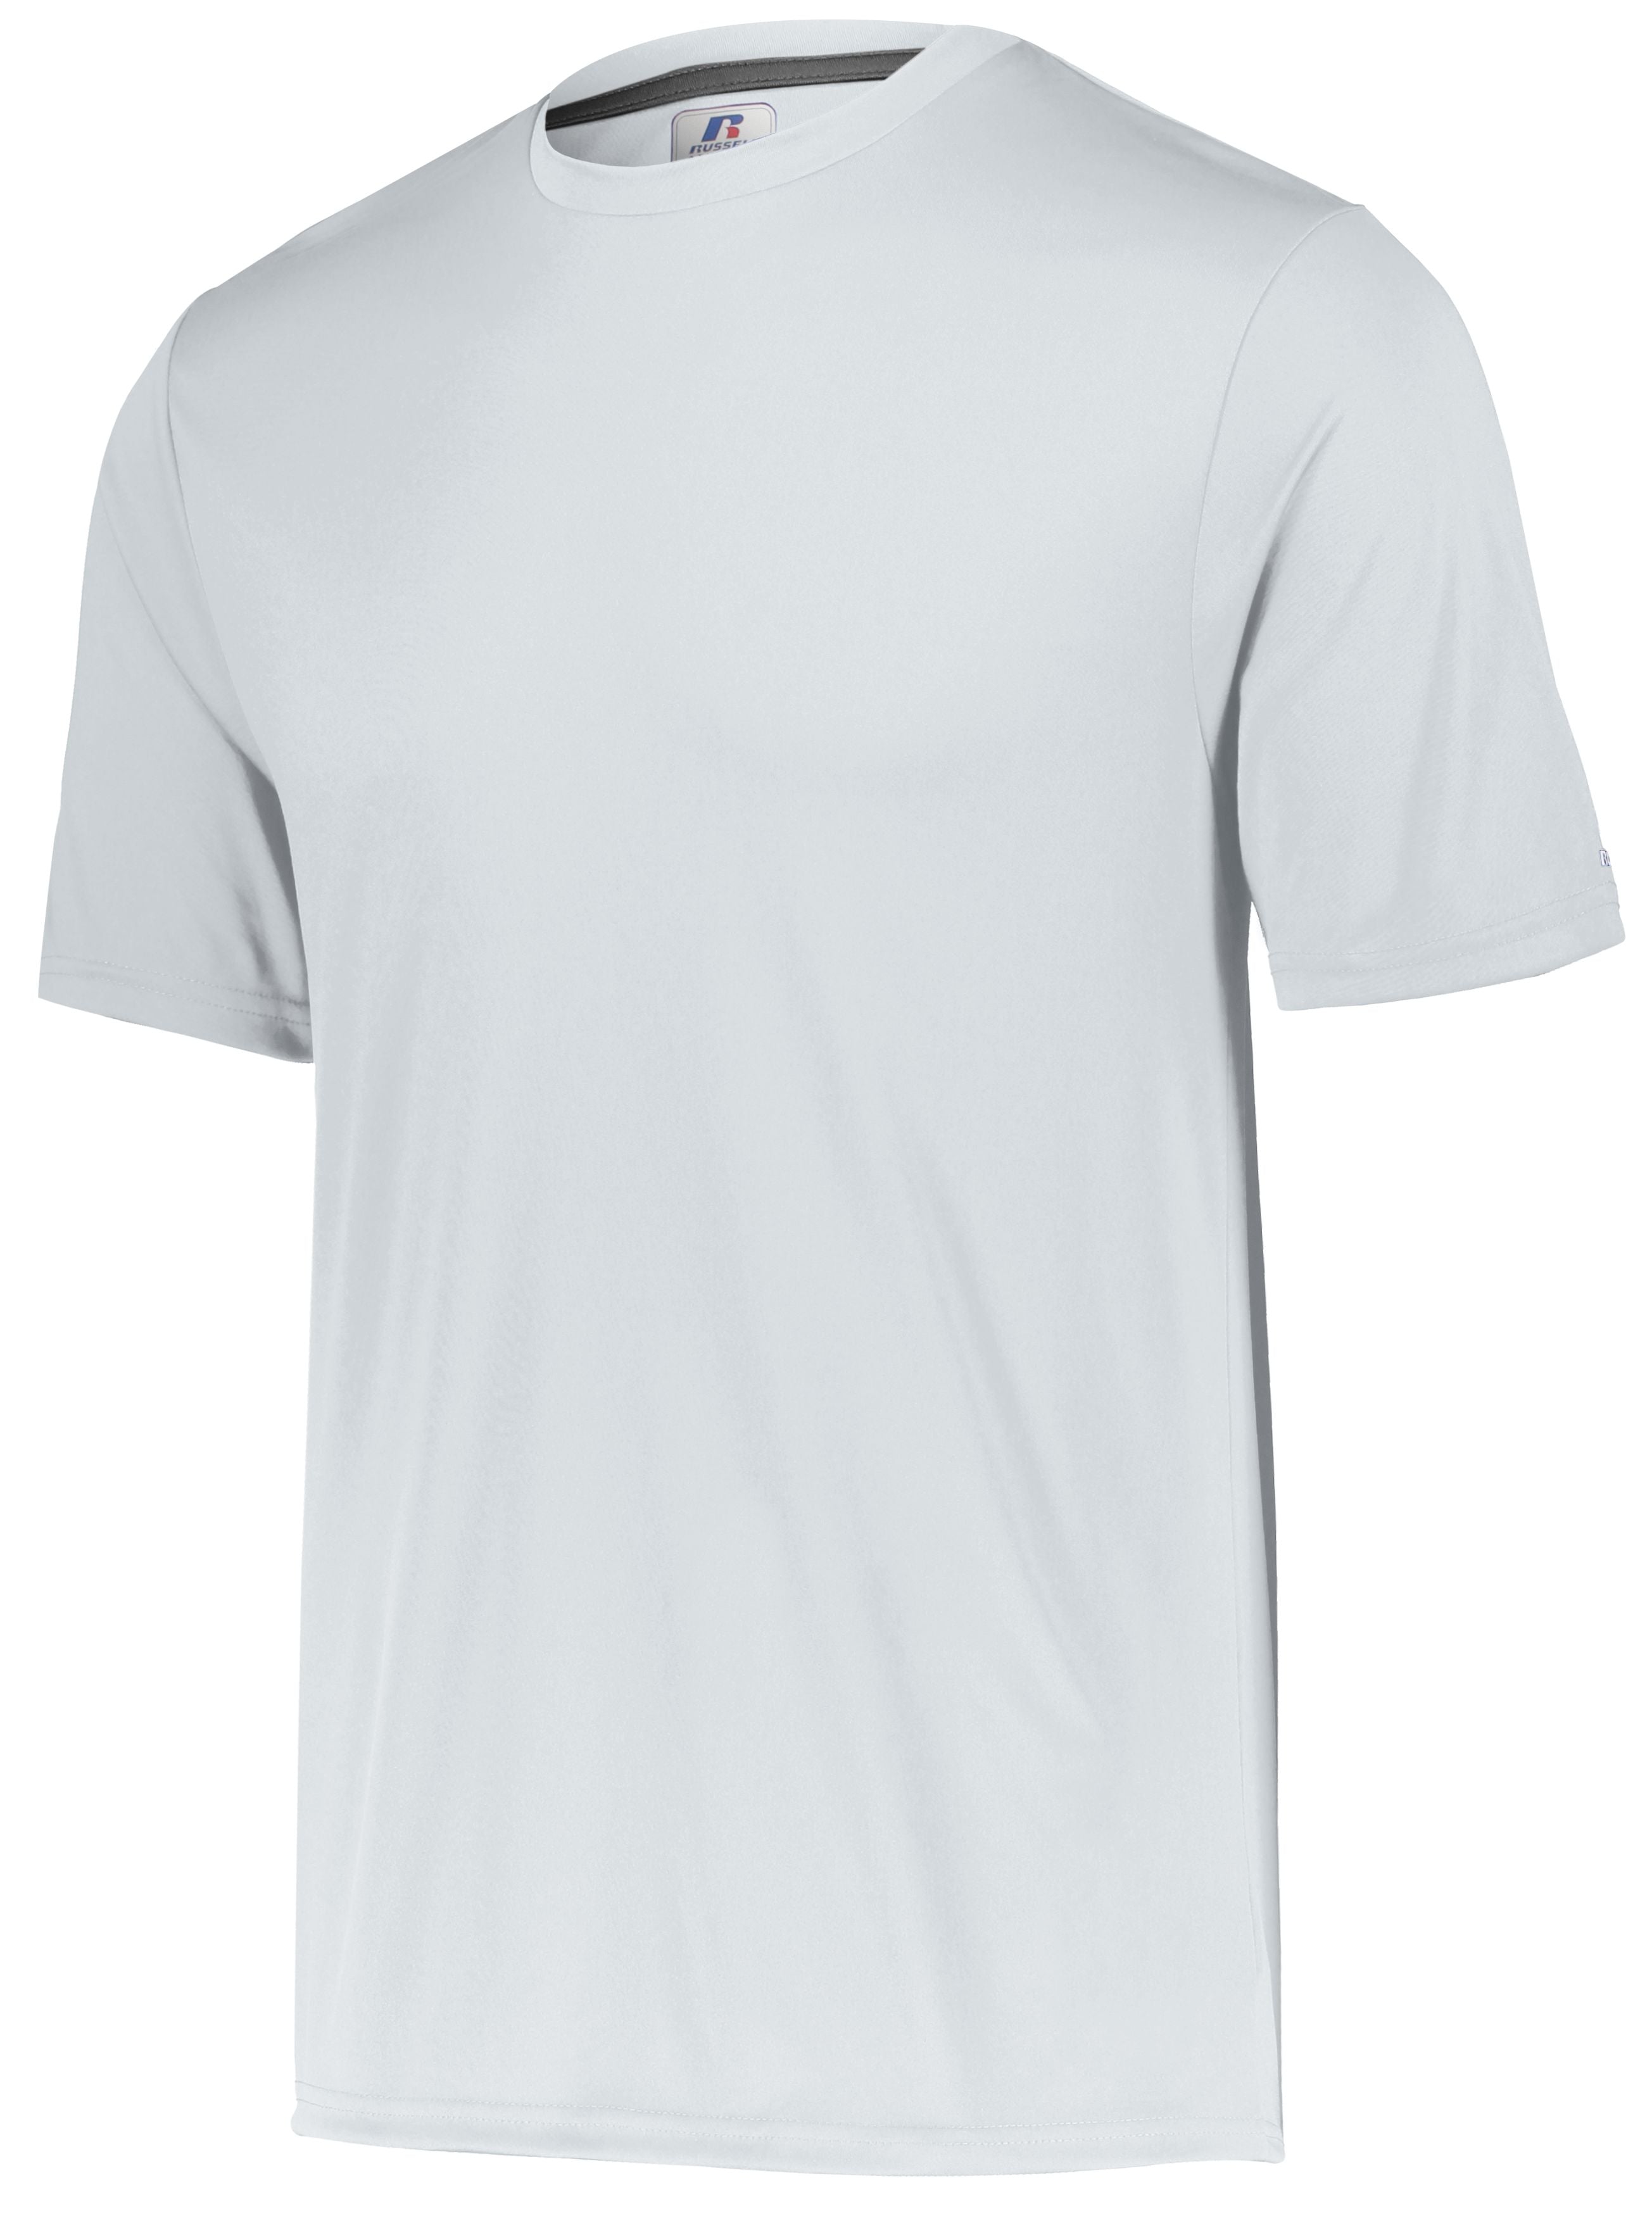 Russell Athletic Youth Dri-Power Core Performance Tee in White  -Part of the Youth, Youth-Tee-Shirt, T-Shirts, Russell-Athletic-Products, Shirts product lines at KanaleyCreations.com